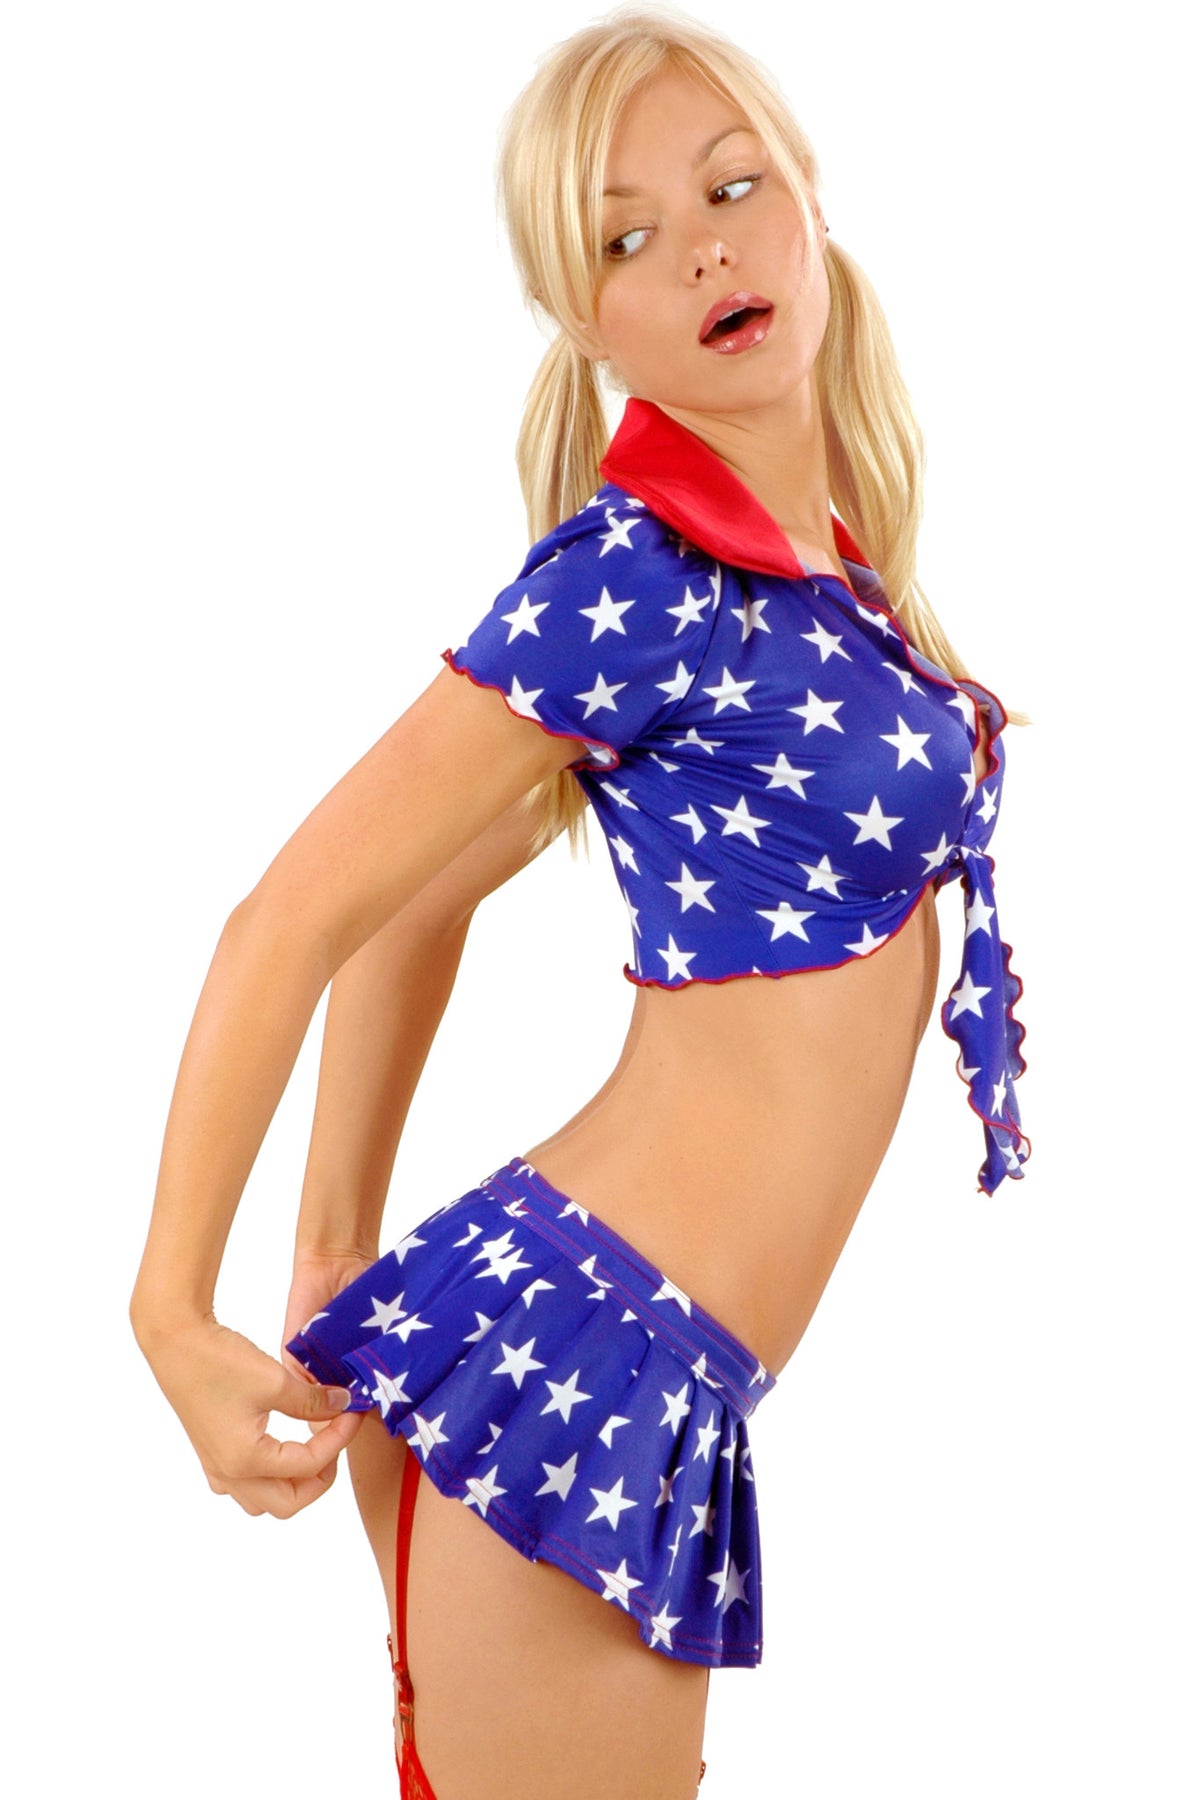 Star-Spangled Cabbage Tie Top